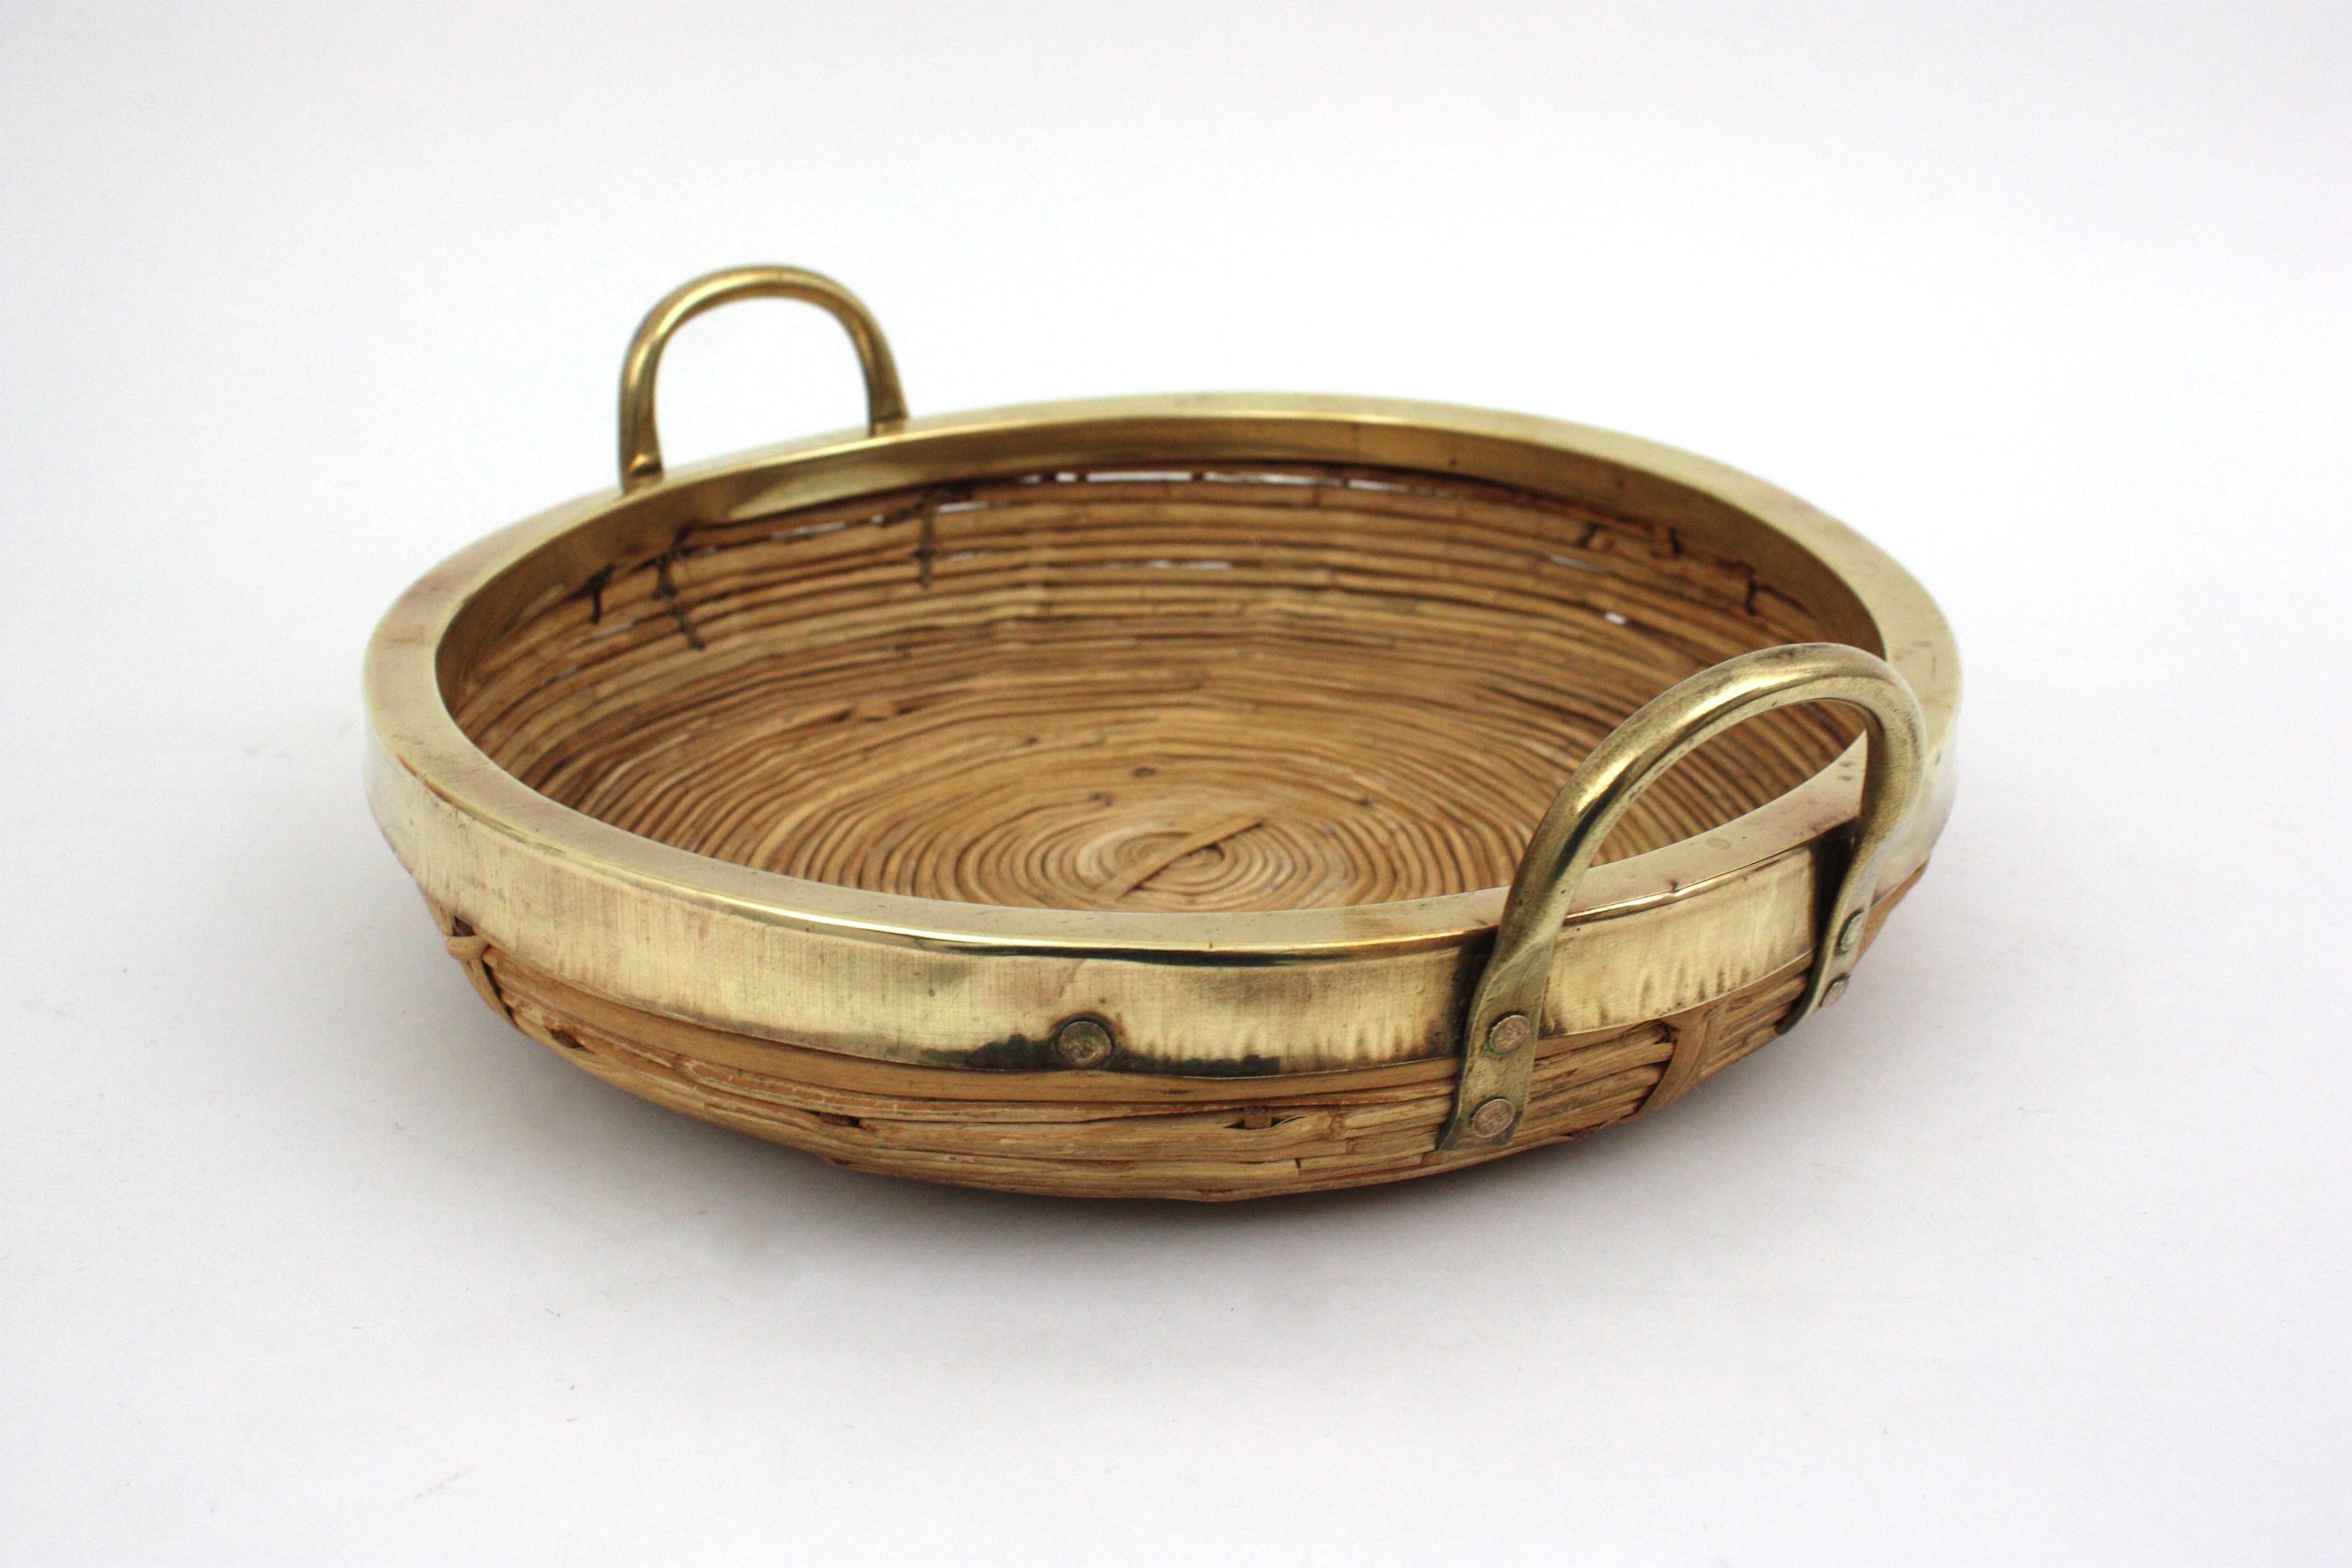 Rattan and Brass Italian Centerpiece Tray Basket, 1970s For Sale 5